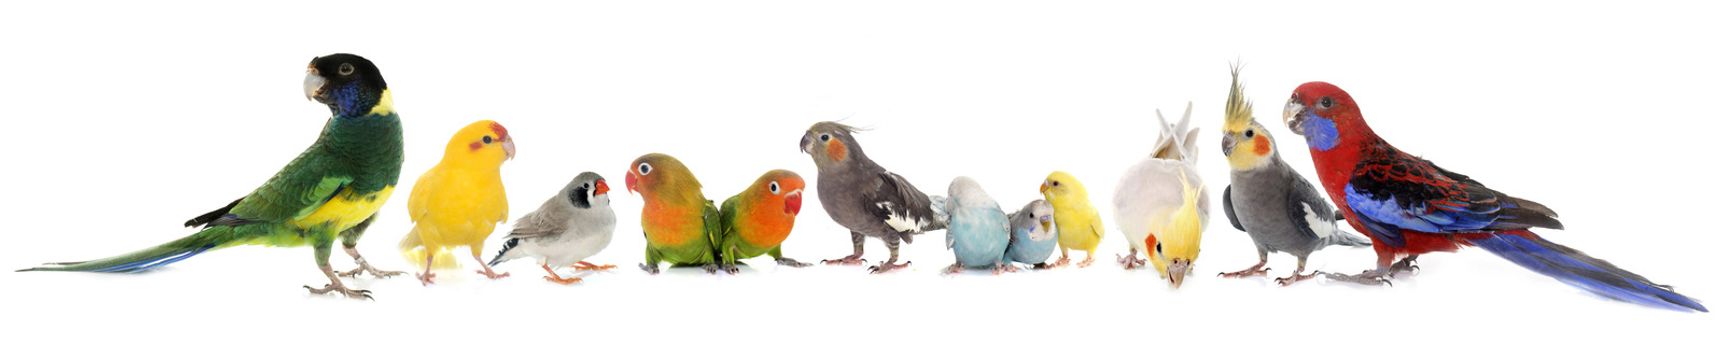 common pet parakeet, African Grey Parrot, lovebirds, Zebra finch and Cockatie lin front of white background